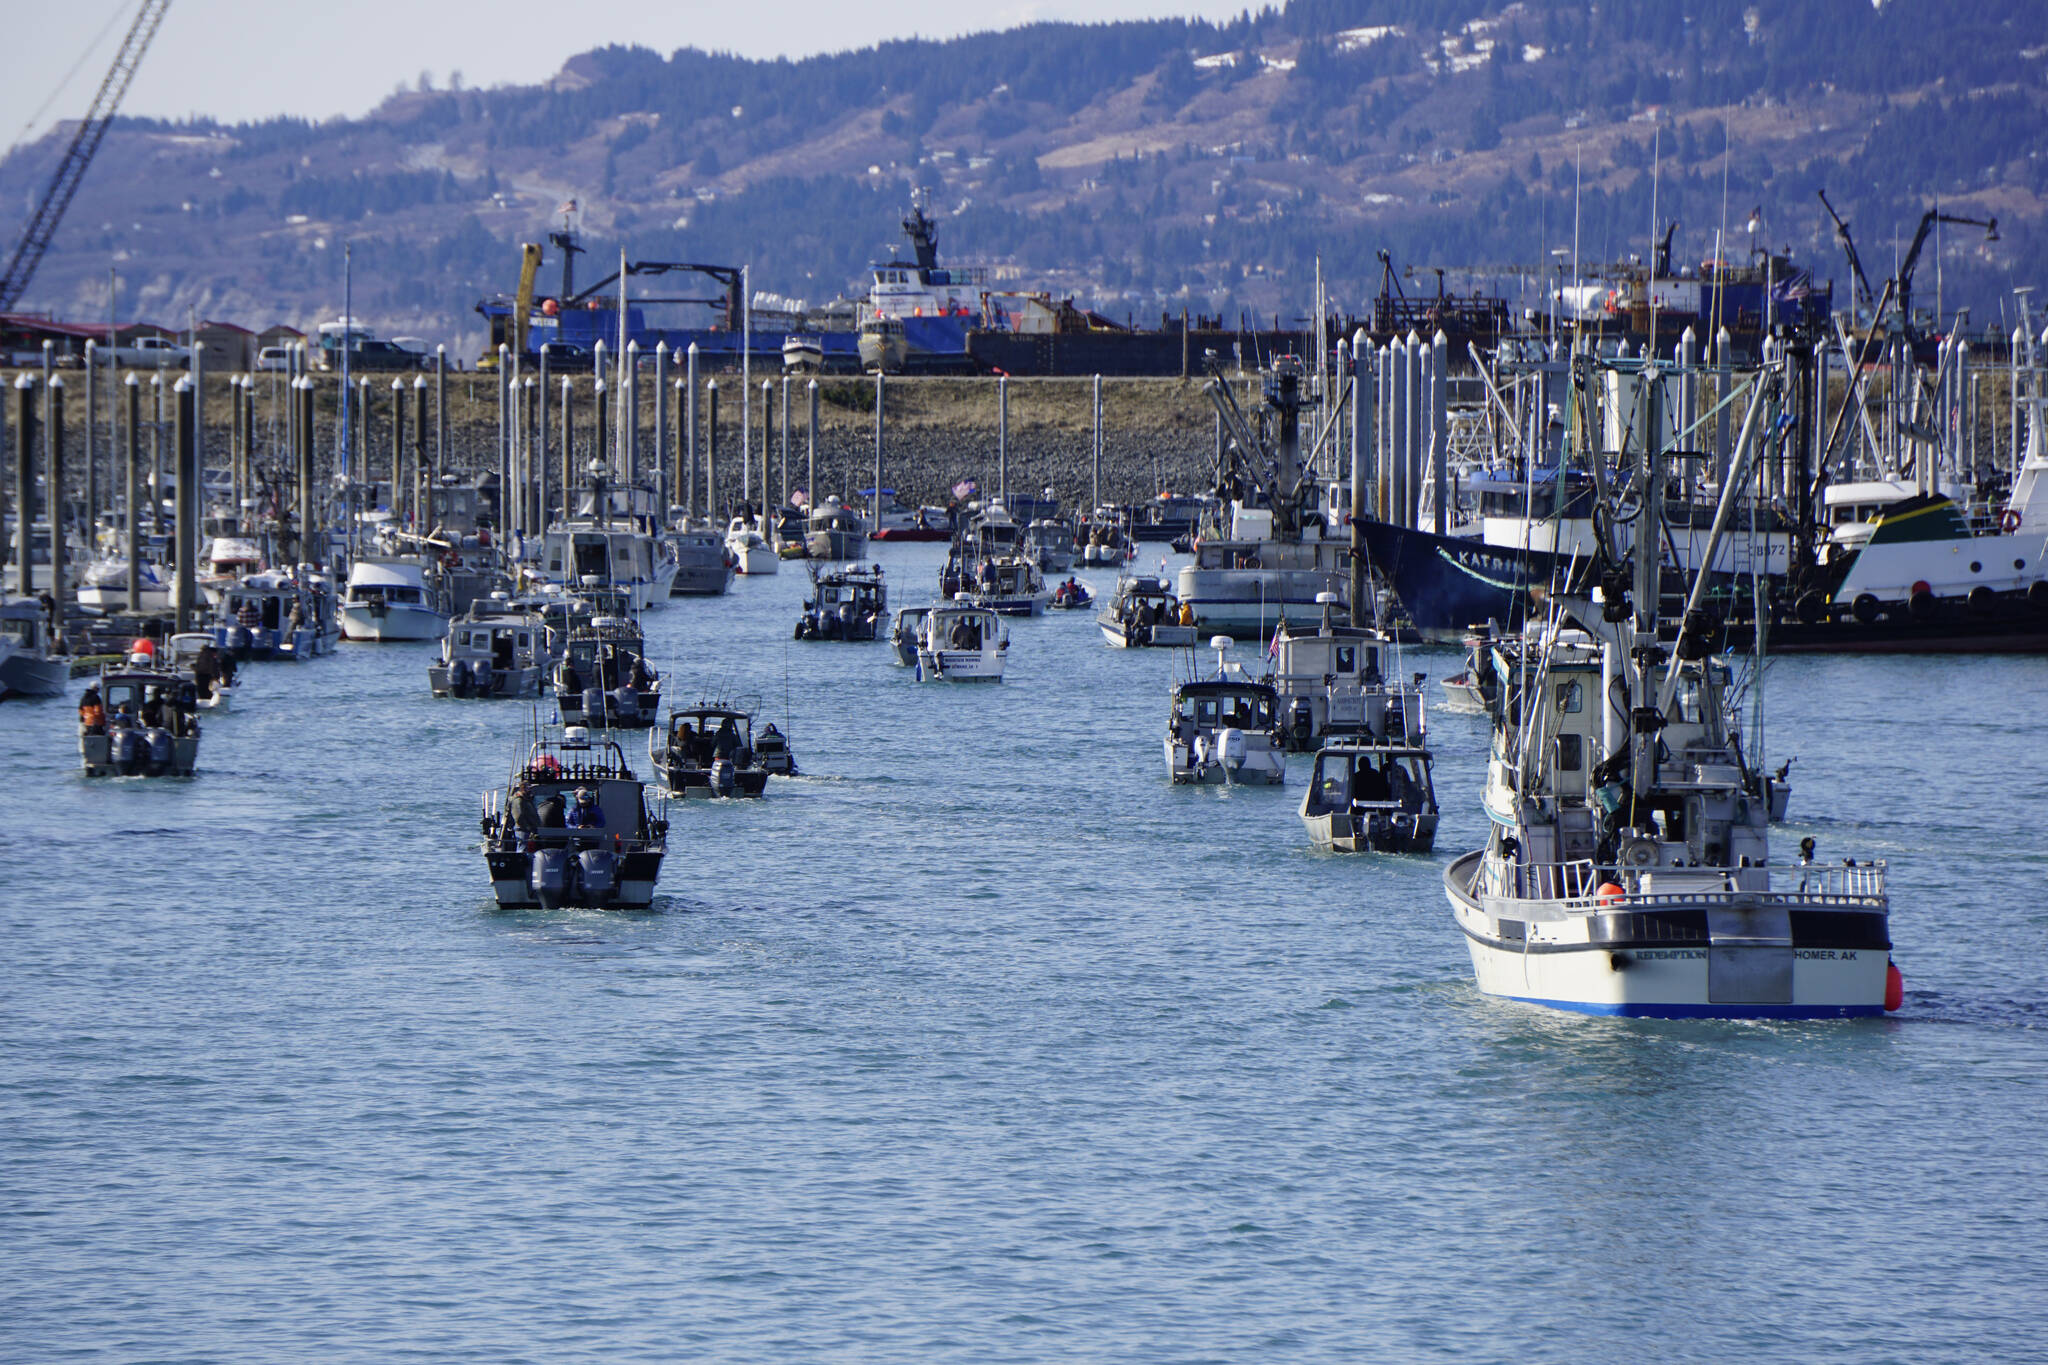 Fishing boats return to the harbor during the 28th annual Homer Winter King Salmon Tournament on Sunday, April 10, 2022, in Kachemak Bay, Homer, Alaska. (Photo by Michael Armstrong/Homer News)